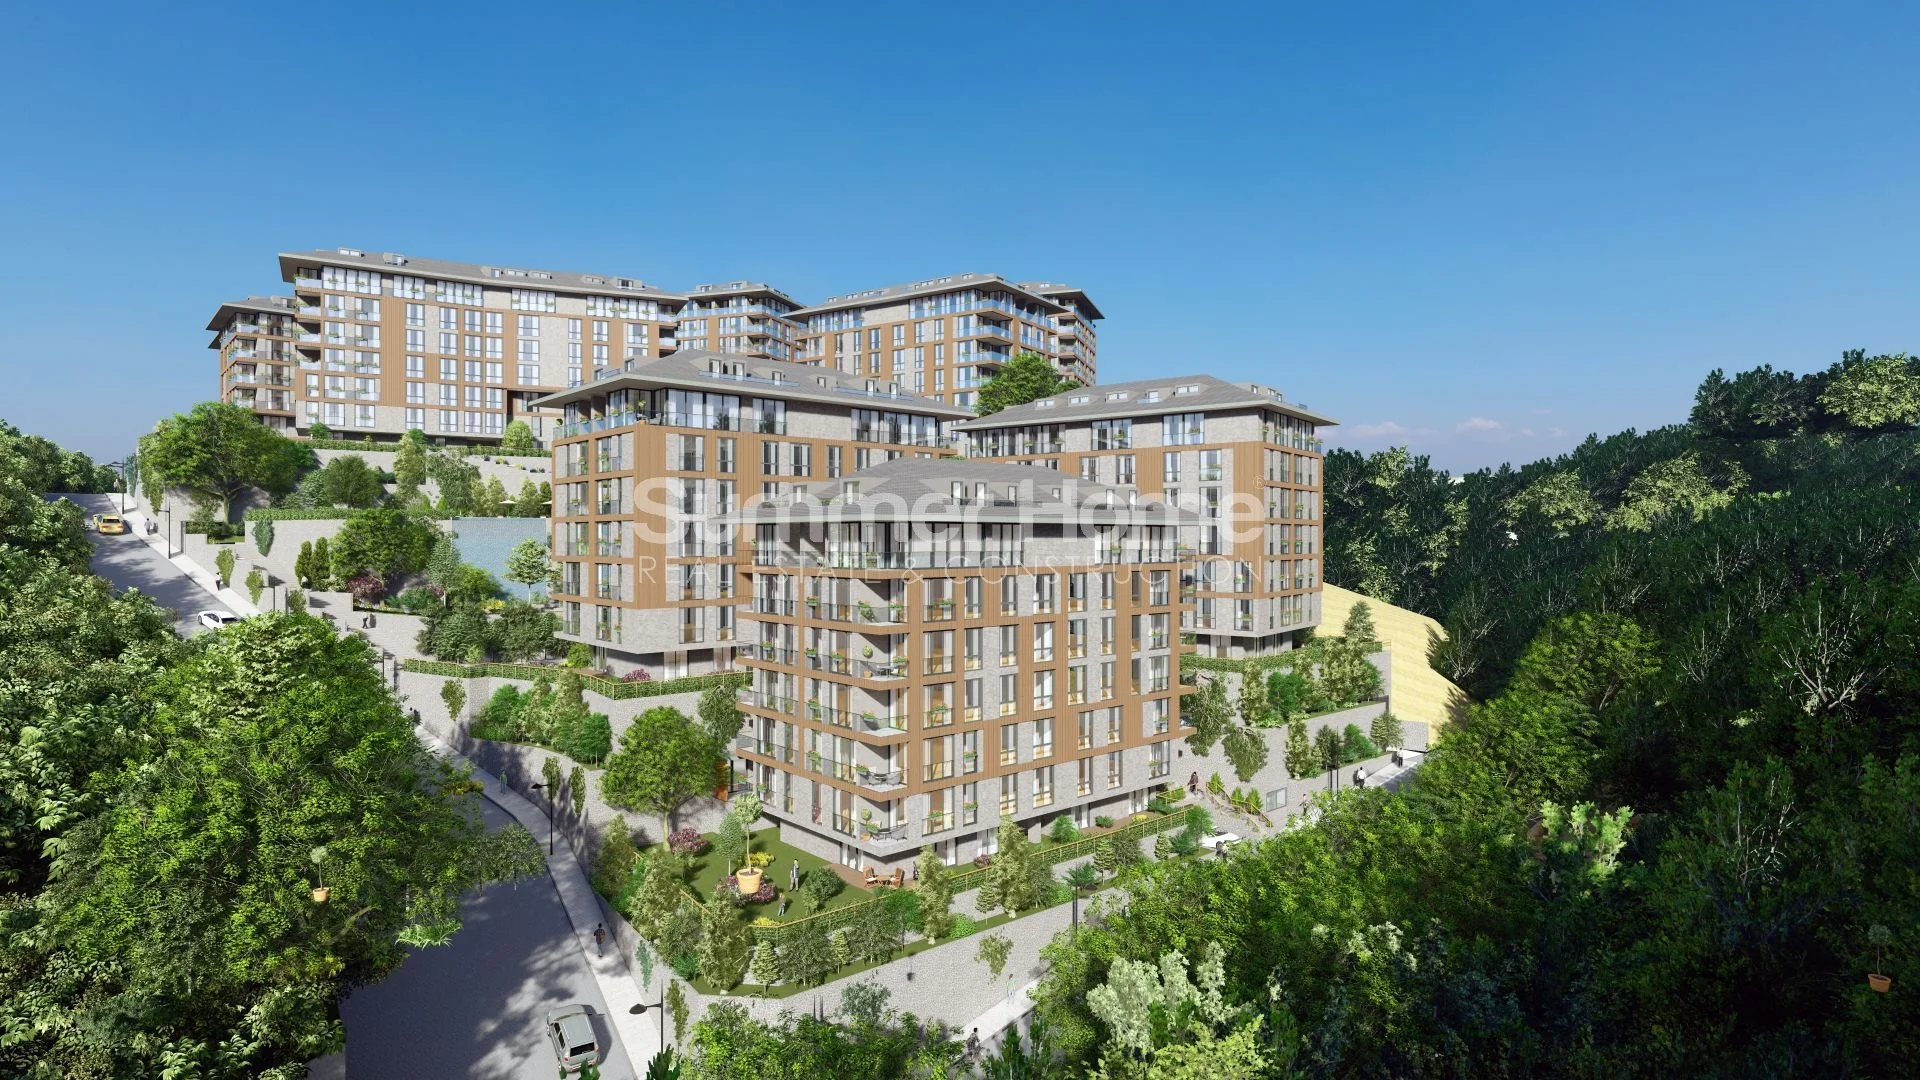 Fabulous apartments situated in Uskudar district of Istanbul Plan - 40